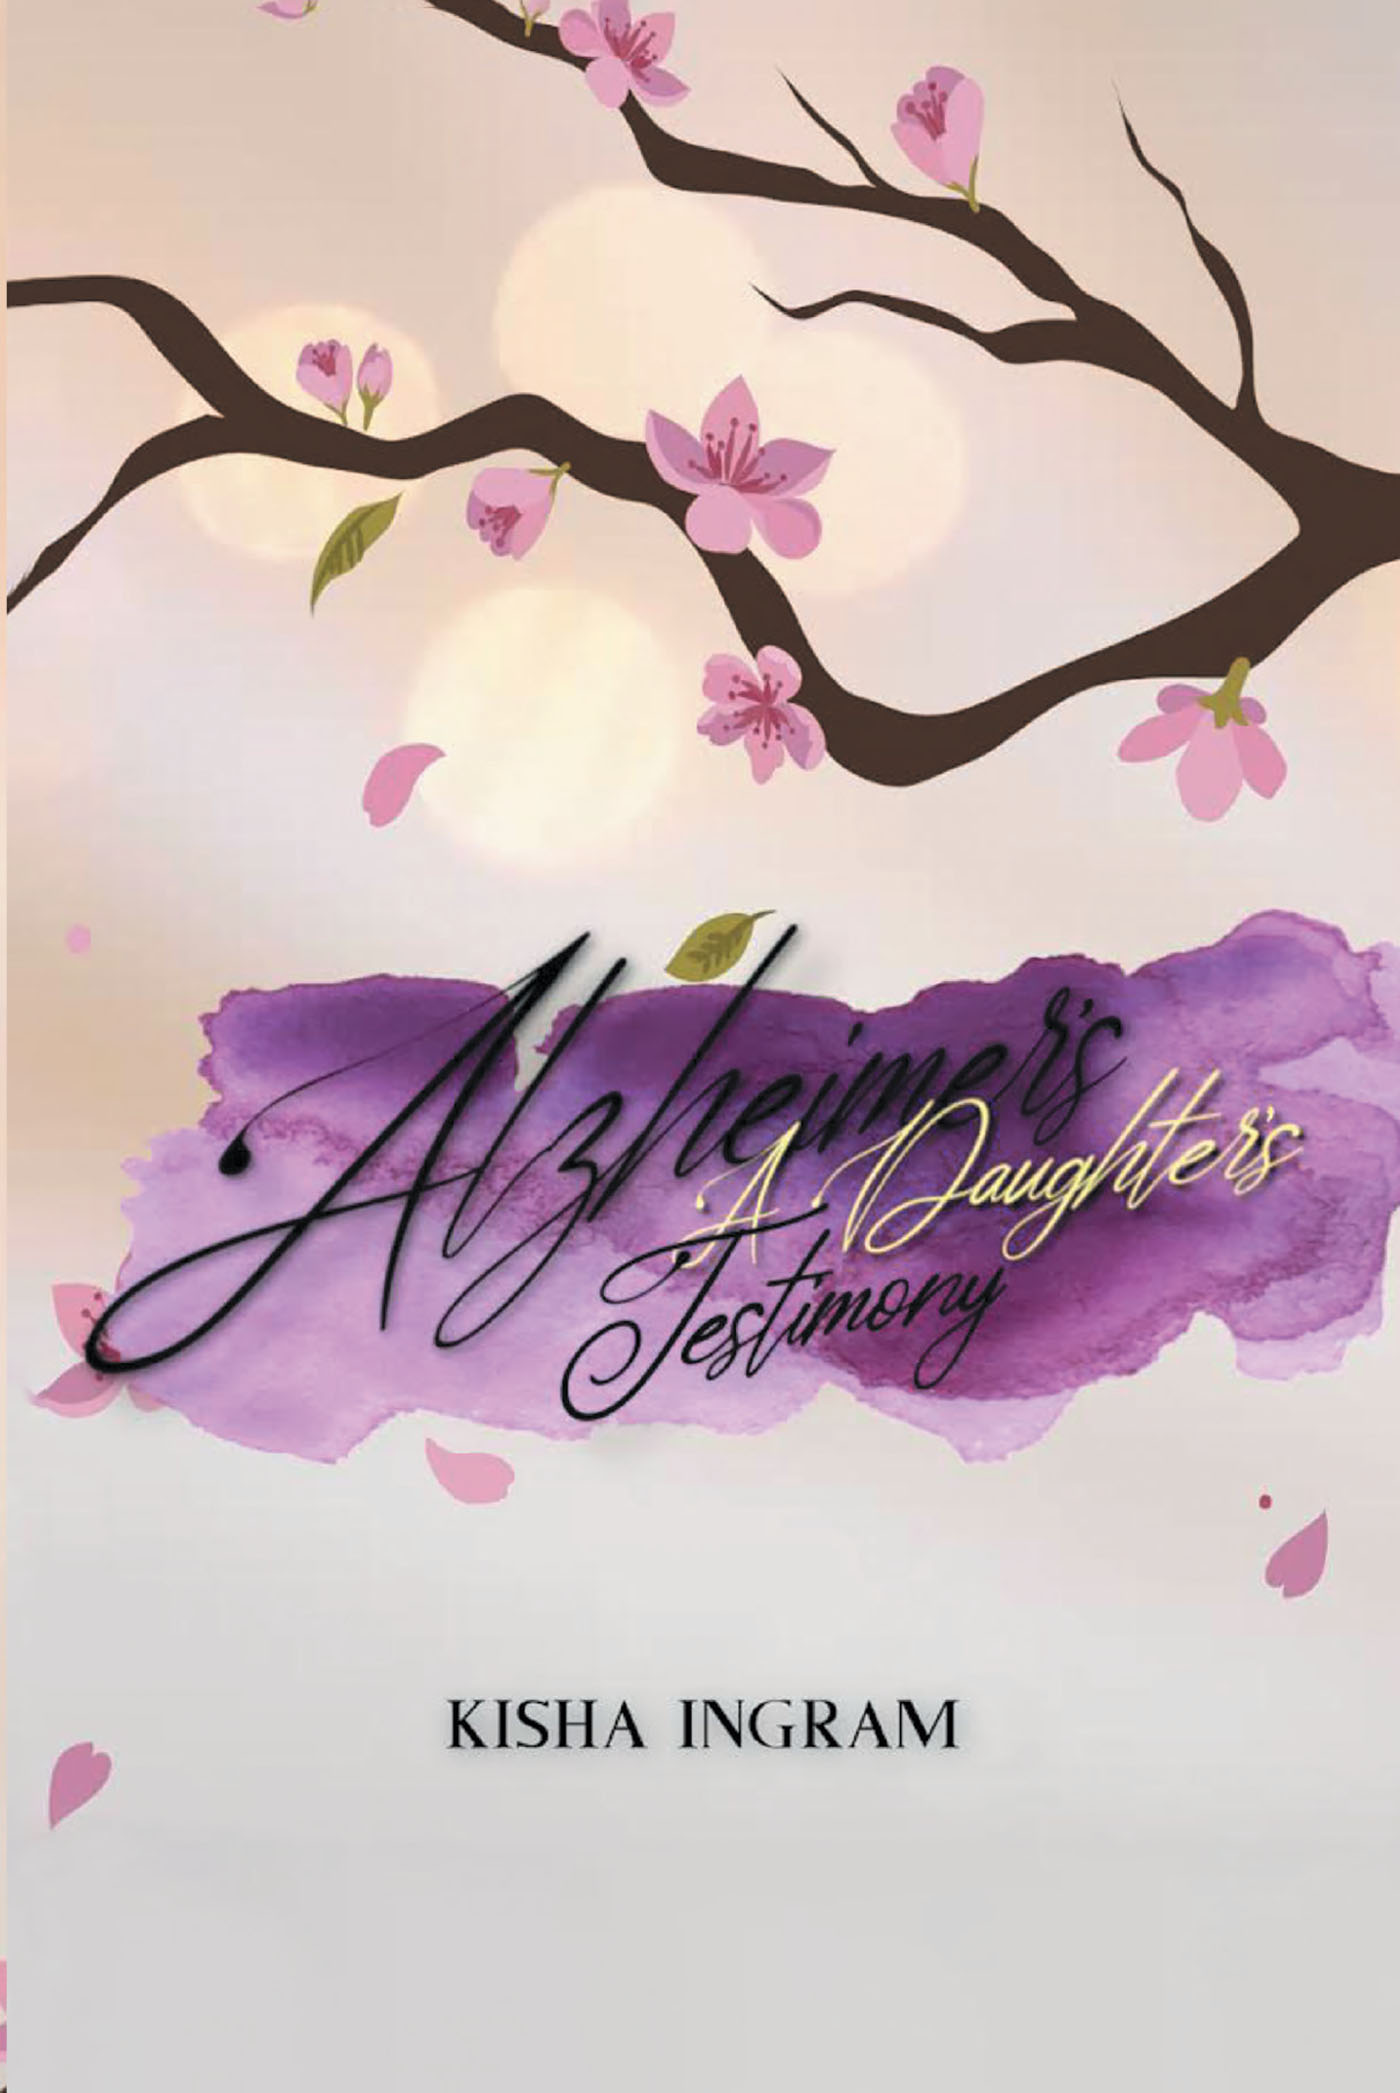 Author Kisha Ingram’s New Book, "Alzheimer’s: A Daughter’s Testimony," is an Illustration of What It’s Like to Care for Someone Living with Alzheimer’s